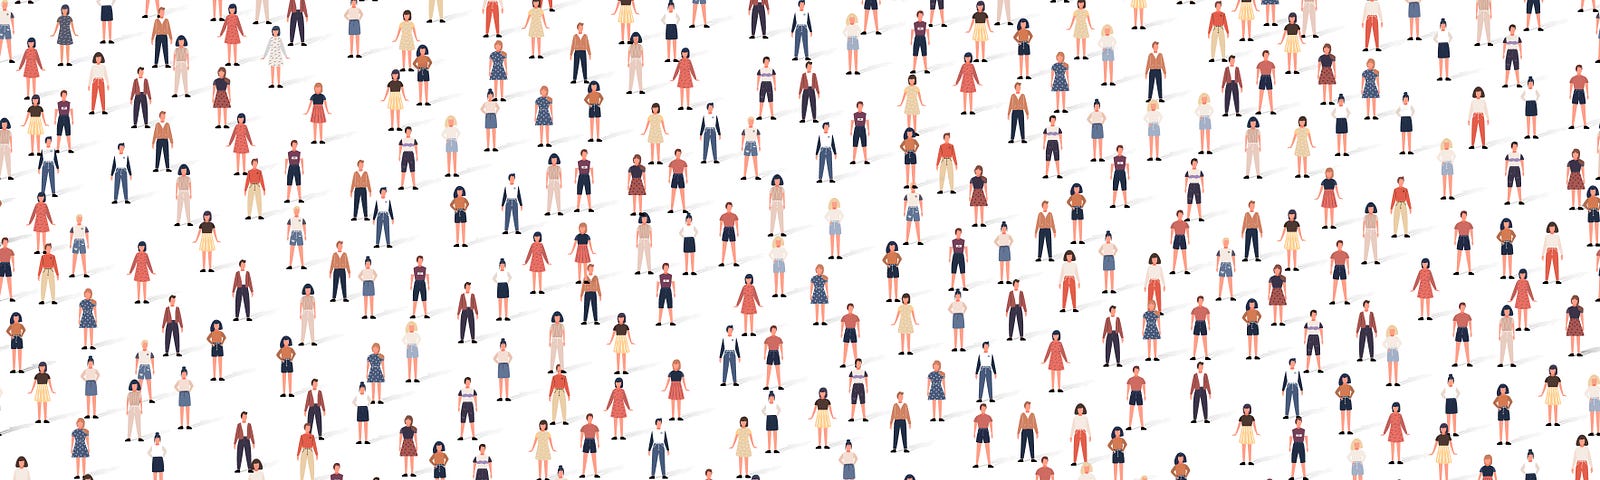 Vector of a crowd of people in a flat, seamless pattern style with shadows.